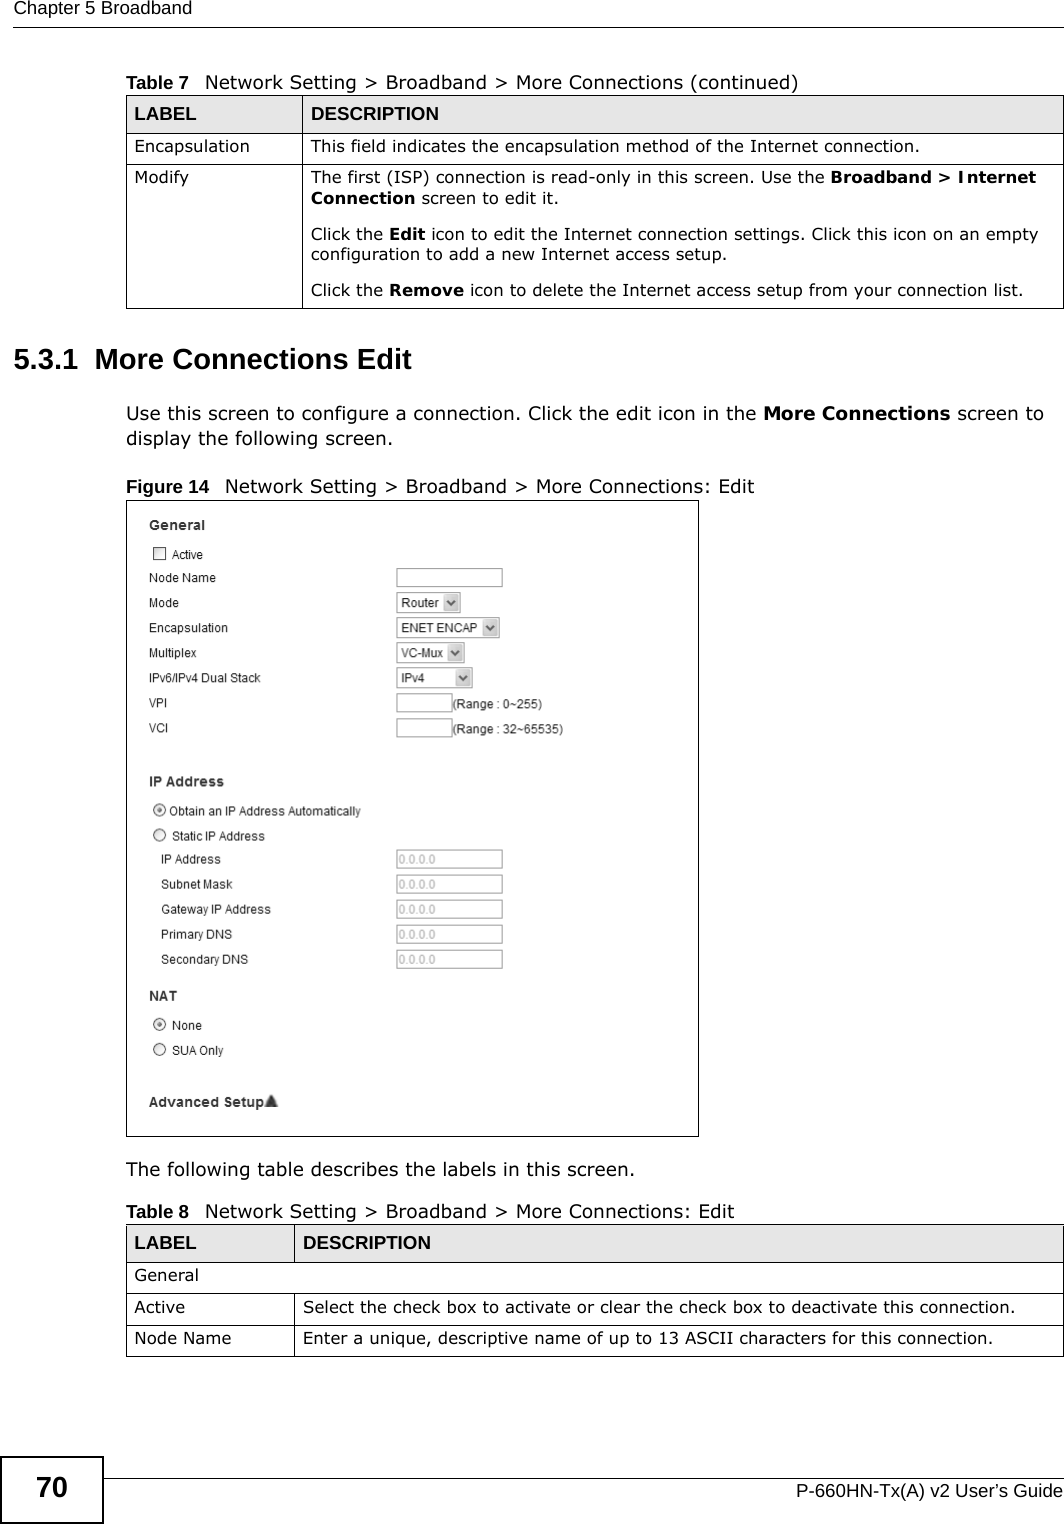 Chapter 5 BroadbandP-660HN-Tx(A) v2 User’s Guide705.3.1  More Connections EditUse this screen to configure a connection. Click the edit icon in the More Connections screen to display the following screen.Figure 14   Network Setting &gt; Broadband &gt; More Connections: EditThe following table describes the labels in this screen.      Encapsulation This field indicates the encapsulation method of the Internet connection.Modify The first (ISP) connection is read-only in this screen. Use the Broadband &gt; Internet Connection screen to edit it.Click the Edit icon to edit the Internet connection settings. Click this icon on an empty configuration to add a new Internet access setup.Click the Remove icon to delete the Internet access setup from your connection list.Table 7   Network Setting &gt; Broadband &gt; More Connections (continued)LABEL DESCRIPTIONTable 8   Network Setting &gt; Broadband &gt; More Connections: EditLABEL DESCRIPTIONGeneralActive Select the check box to activate or clear the check box to deactivate this connection.Node Name Enter a unique, descriptive name of up to 13 ASCII characters for this connection.